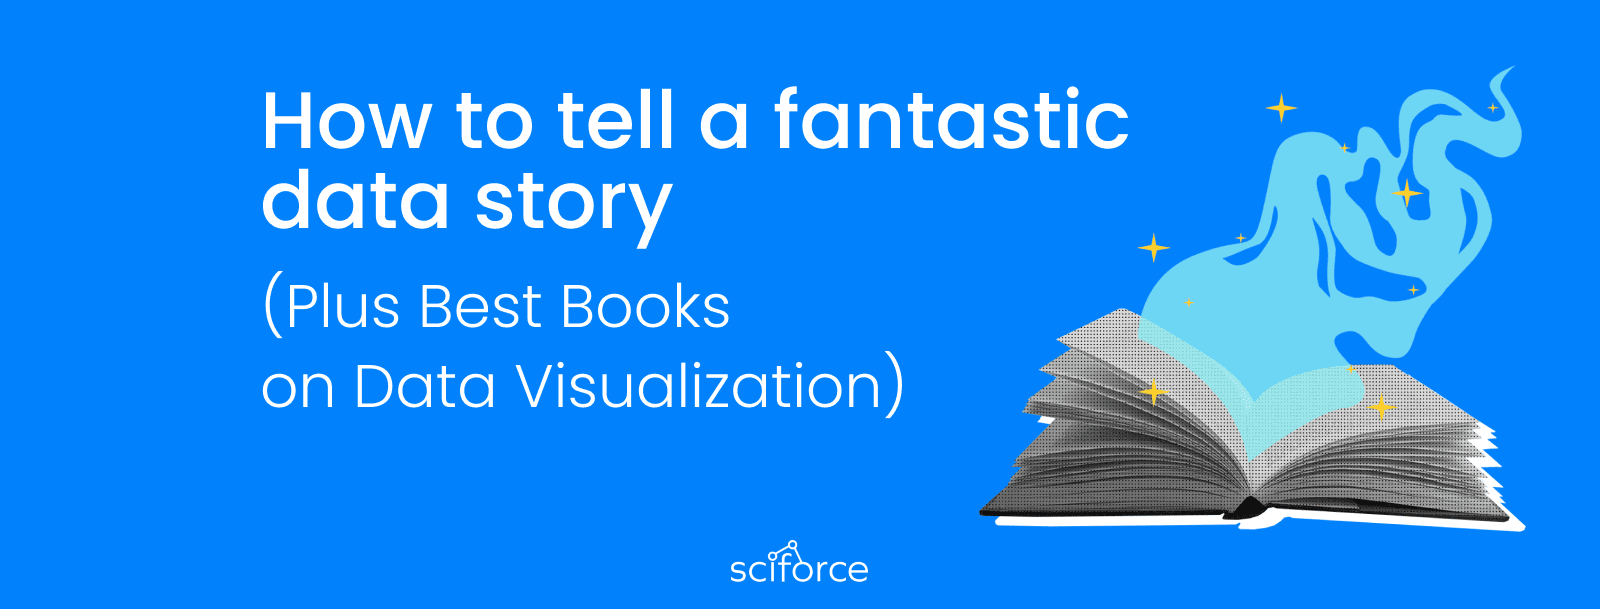 HOW TO TELL A FANTASTIC DATA STORY